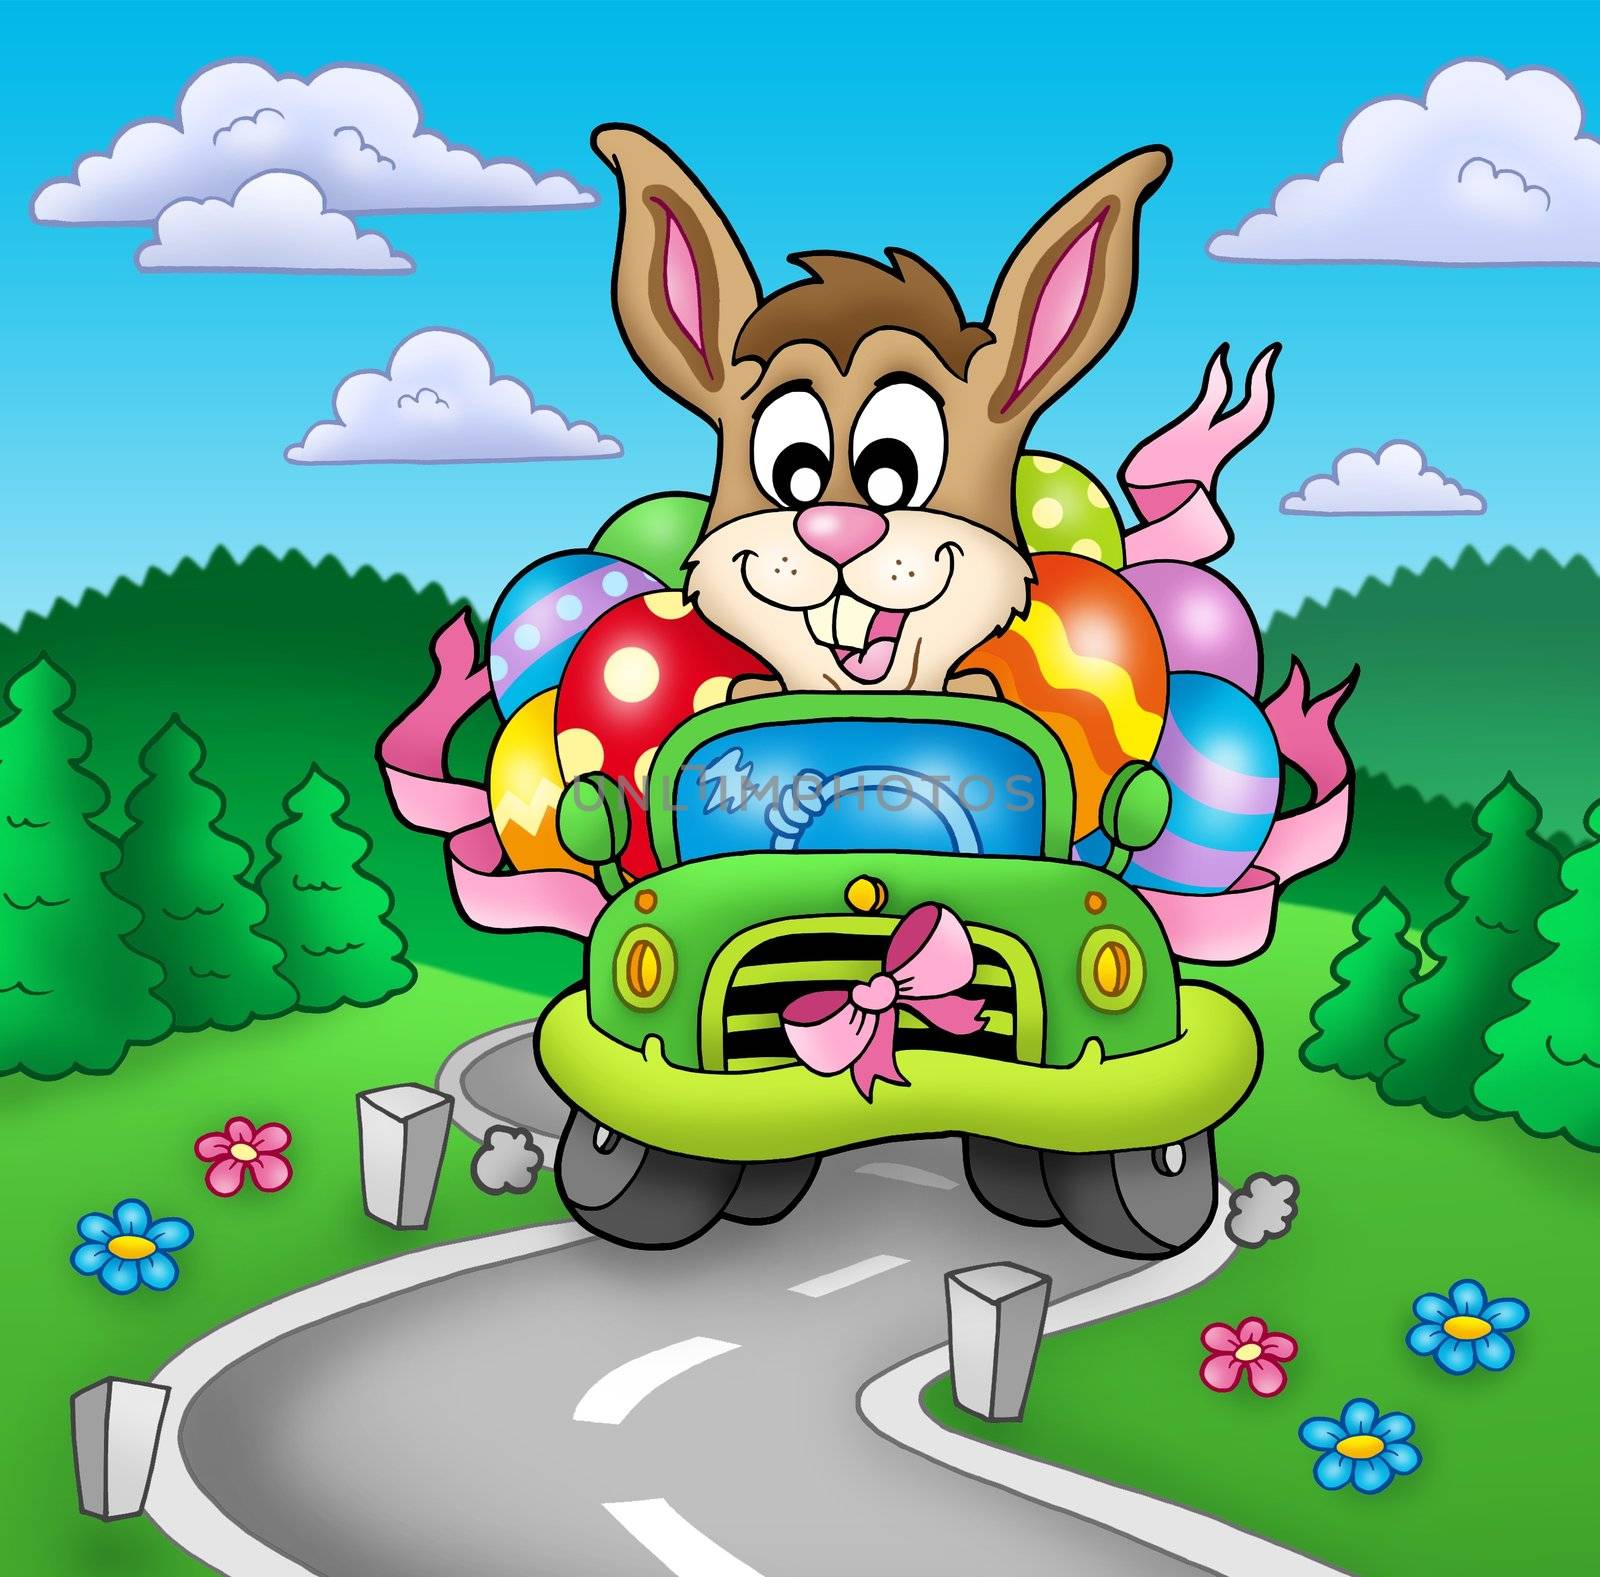 Easter bunny driving car on road - color illustration.